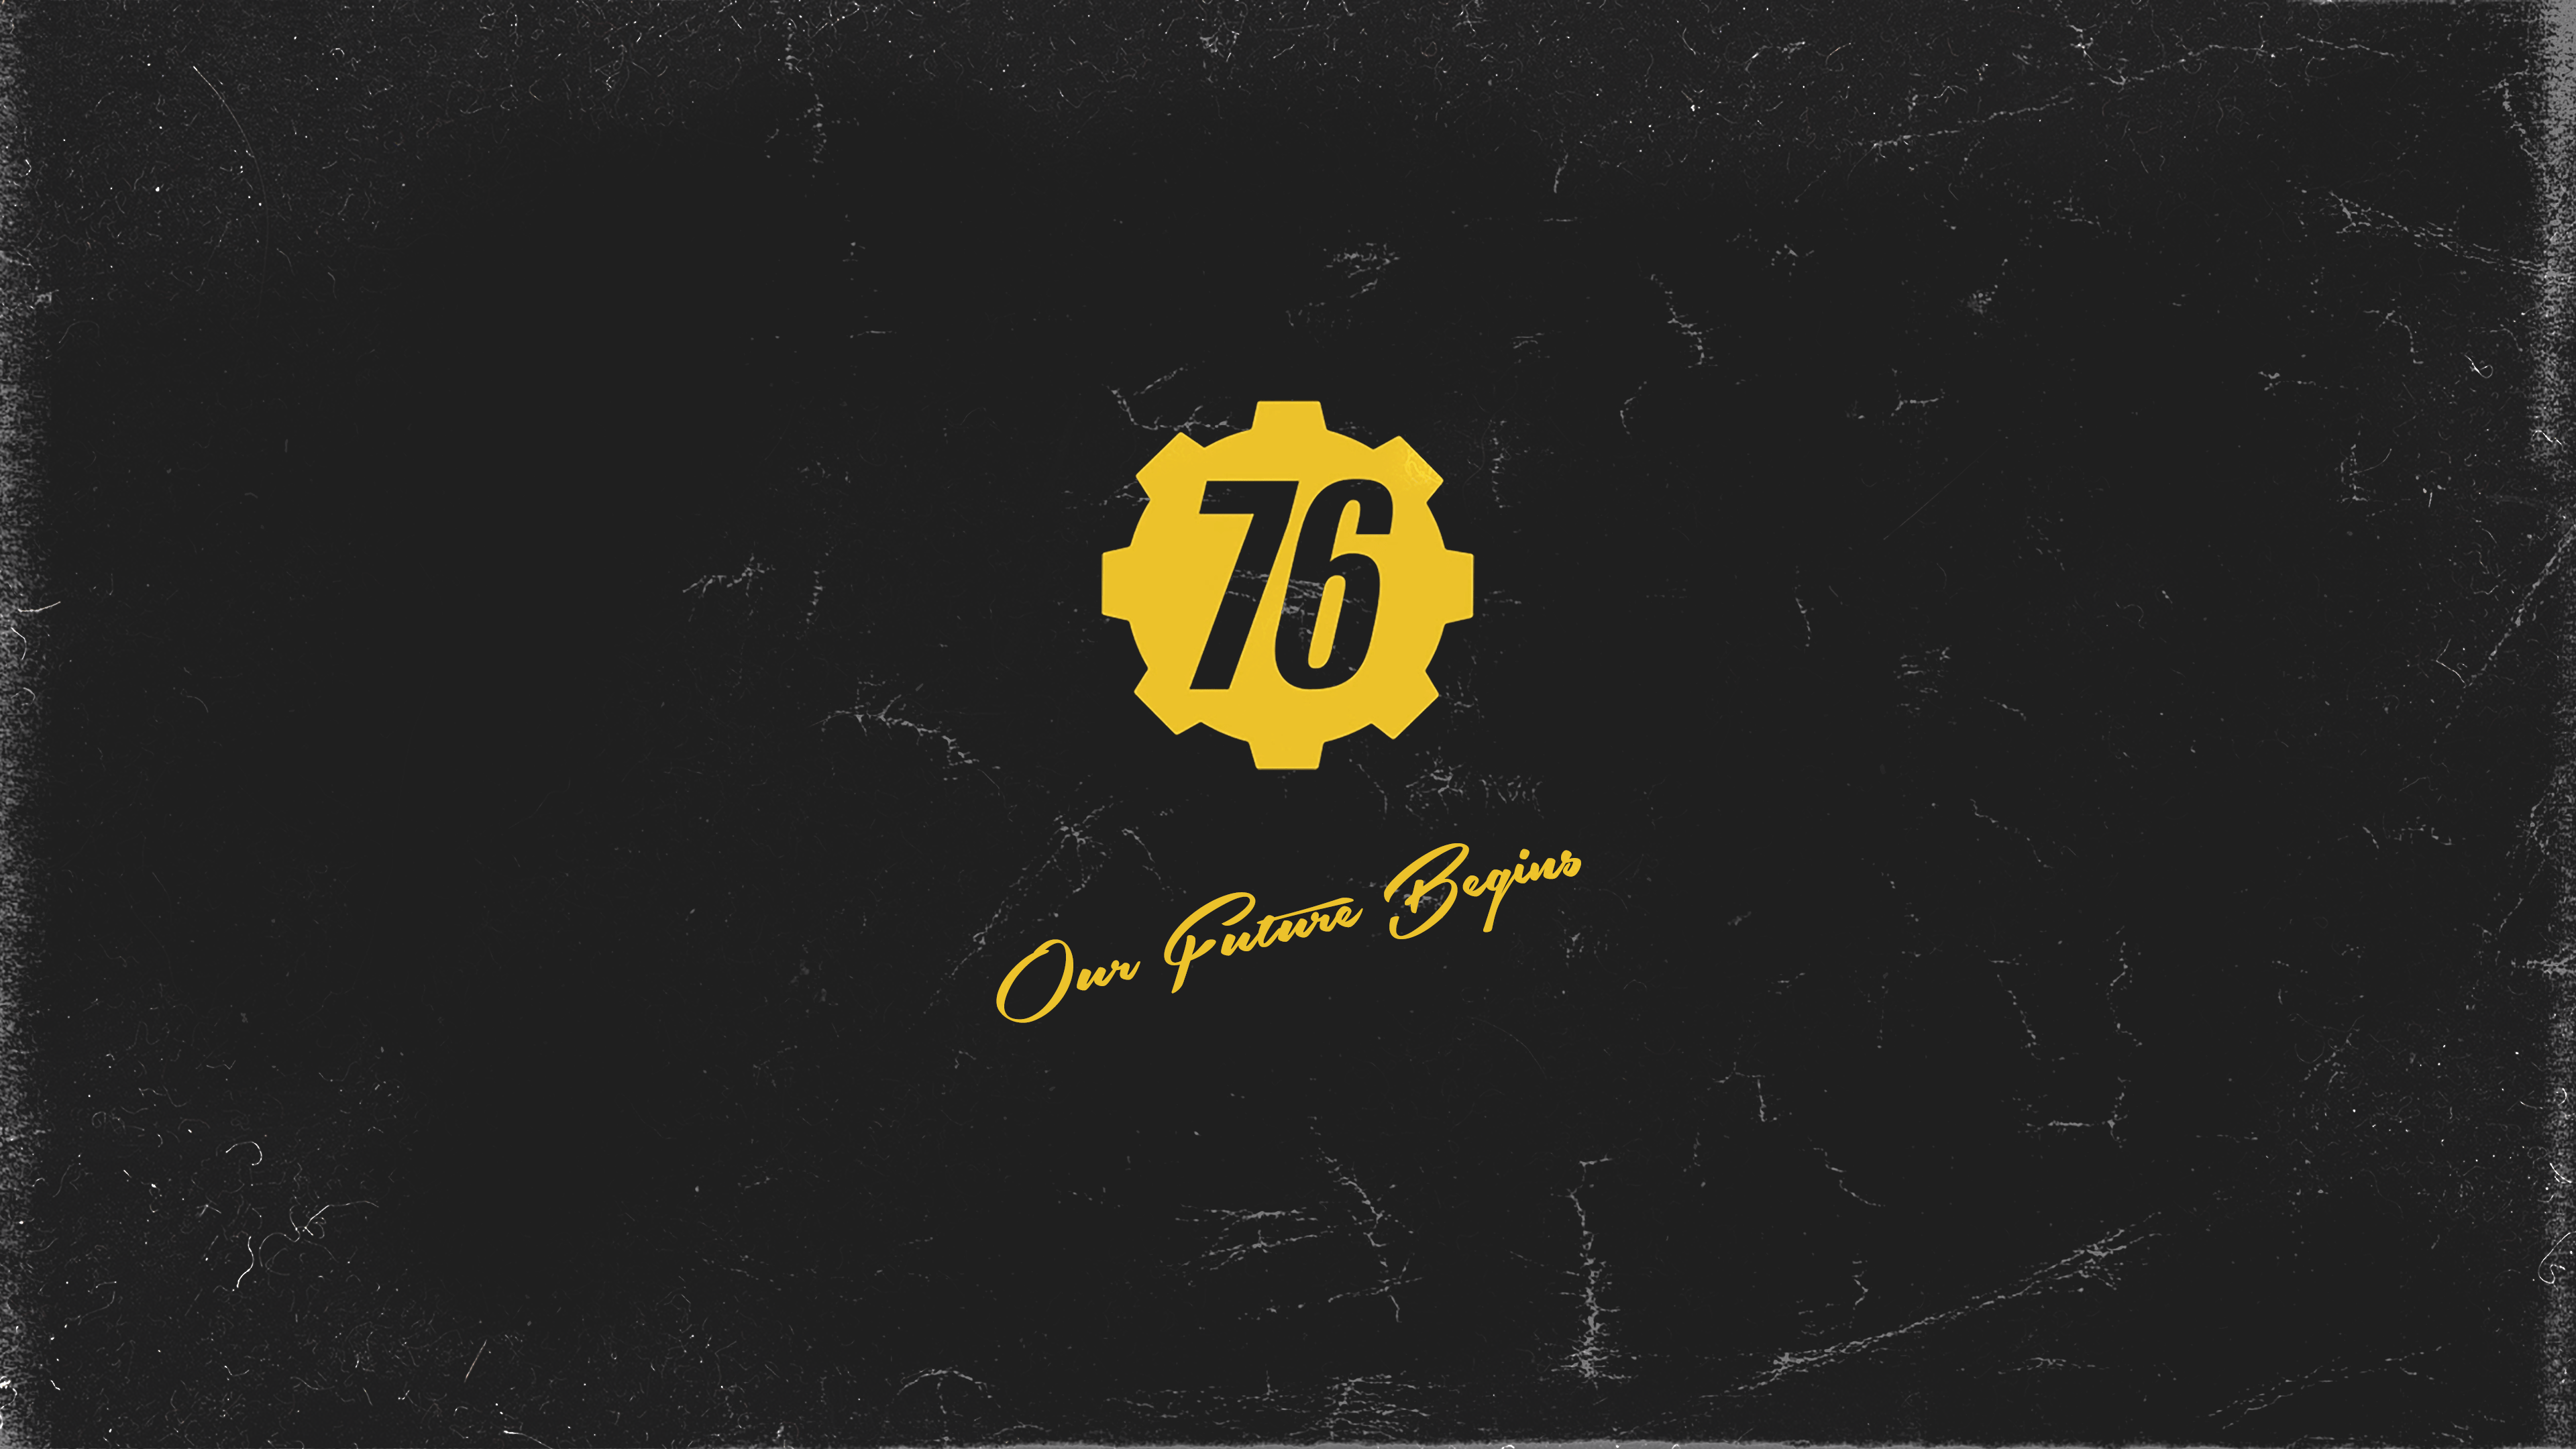 Fallout 76 Wallpapers [16x9] : BethesdaSoftworks